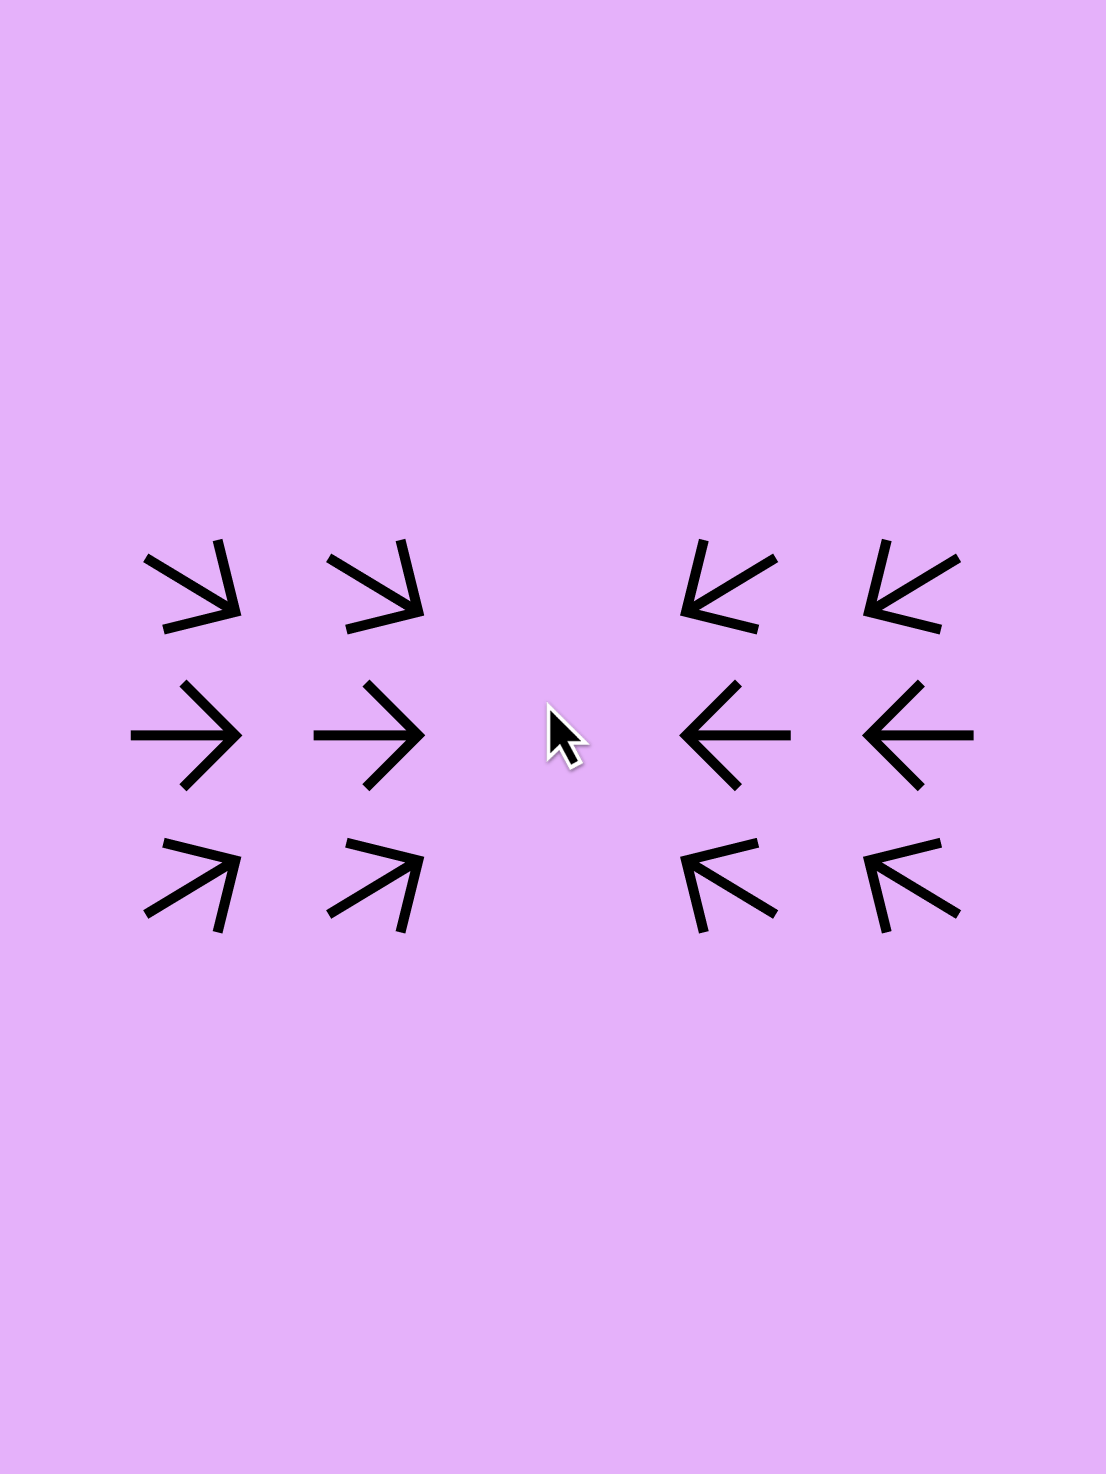 Illustration demonstrating the animation of a cursor